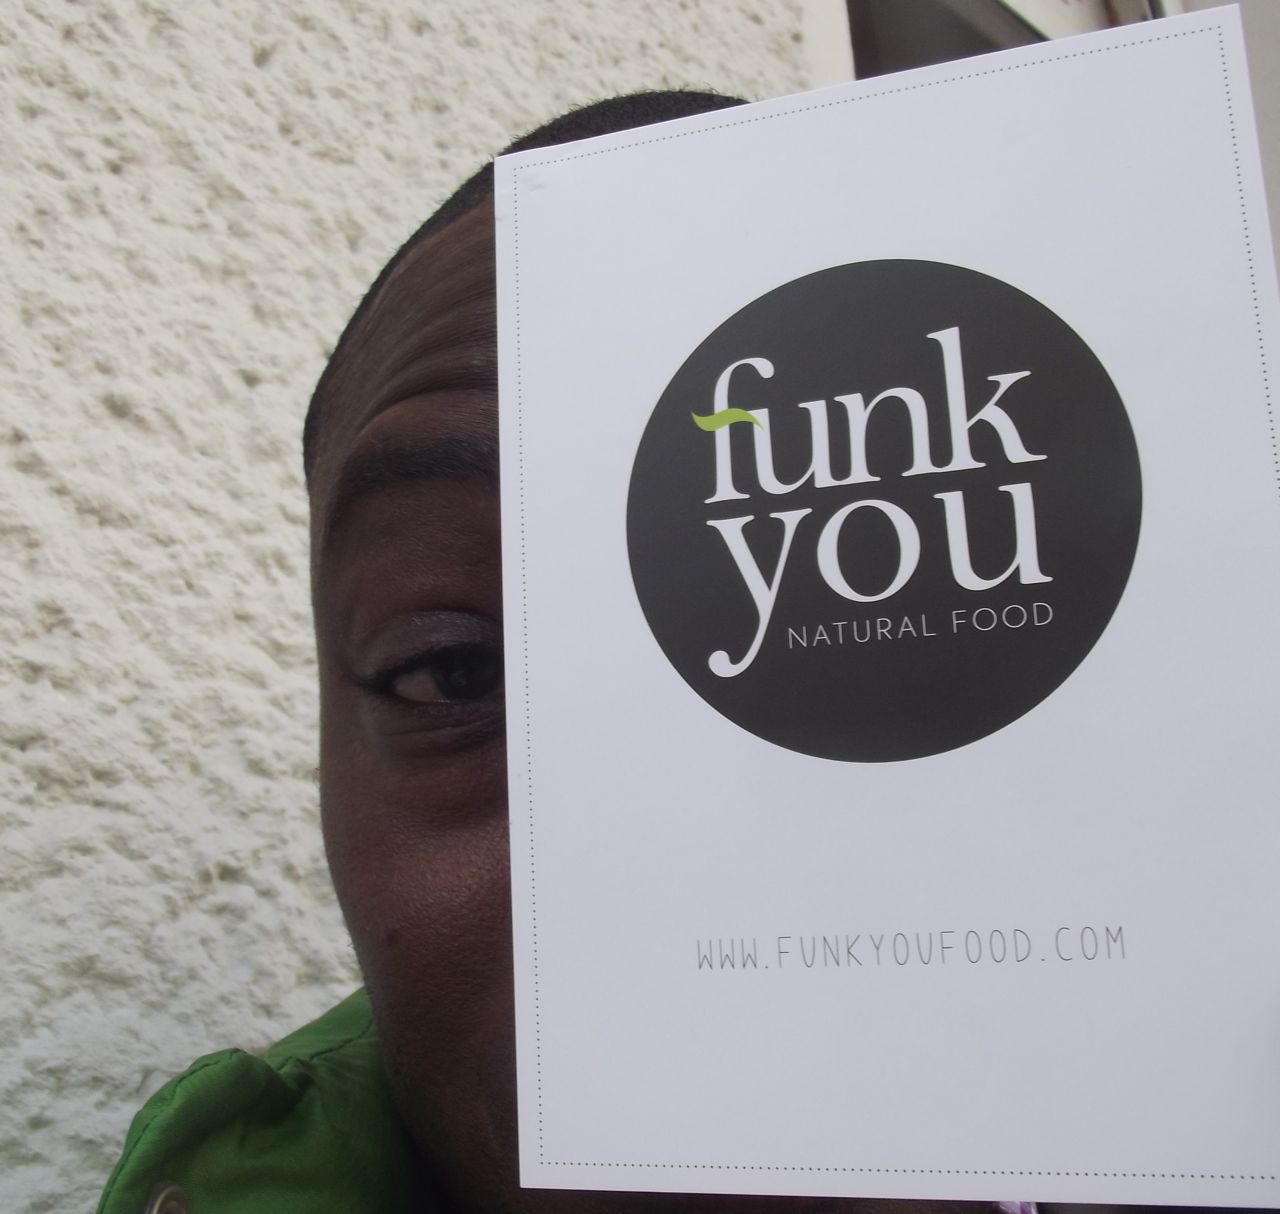 You are currently viewing <!--:en-->“Funk You”The Cafe/Juice Bar for the Healthy freak in you!!!!<!--:-->